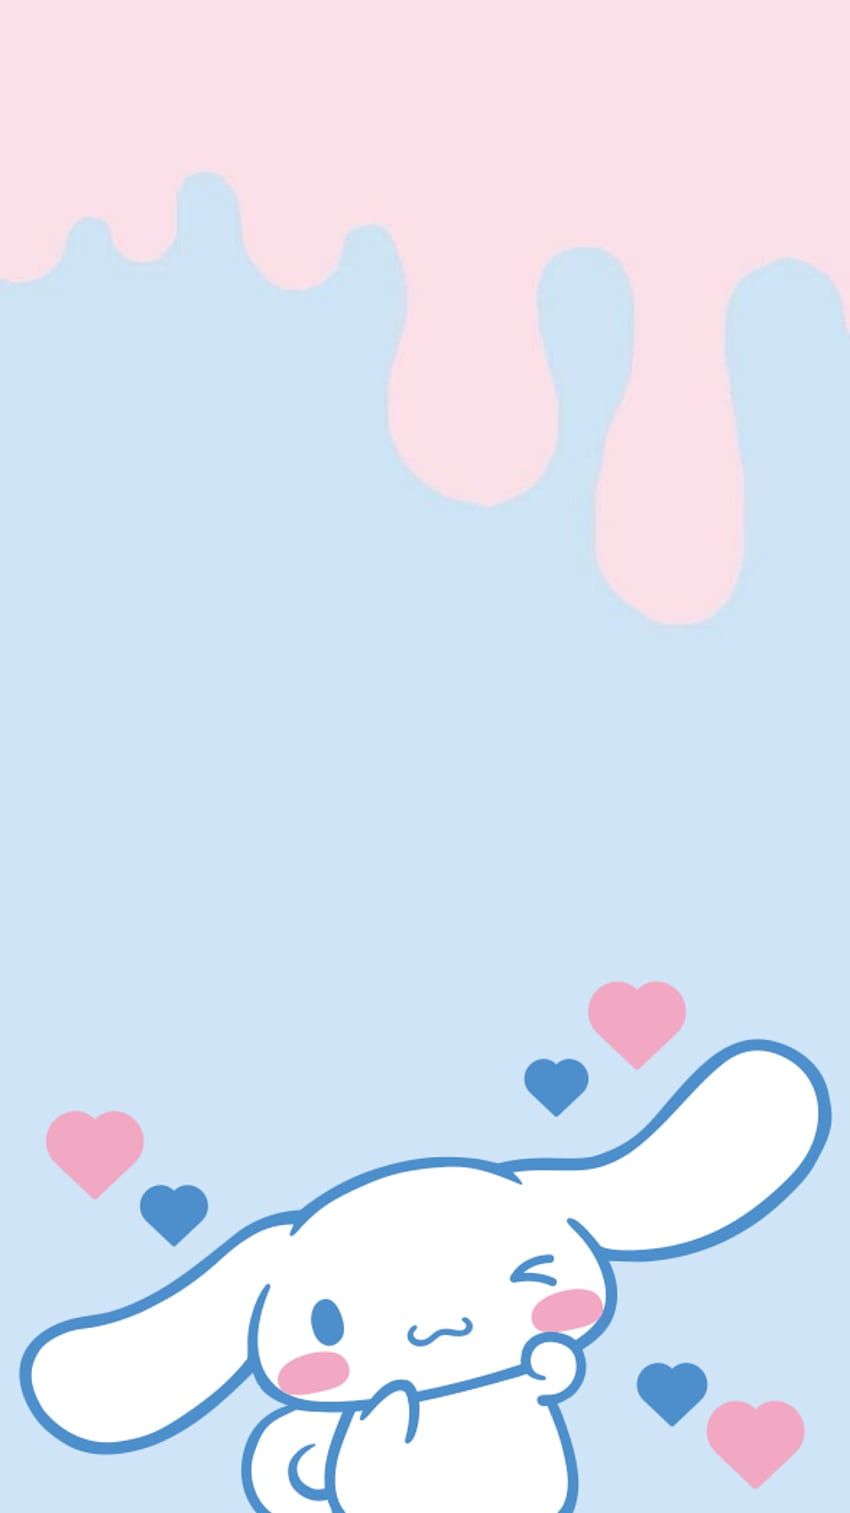 Sanrio iPhone Wallpaper with high-resolution 1080x1920 pixel. You can use this wallpaper for your iPhone 5, 6, 7, 8, X, XS, XR backgrounds, Mobile Screensaver, or iPad Lock Screen - Cinnamoroll